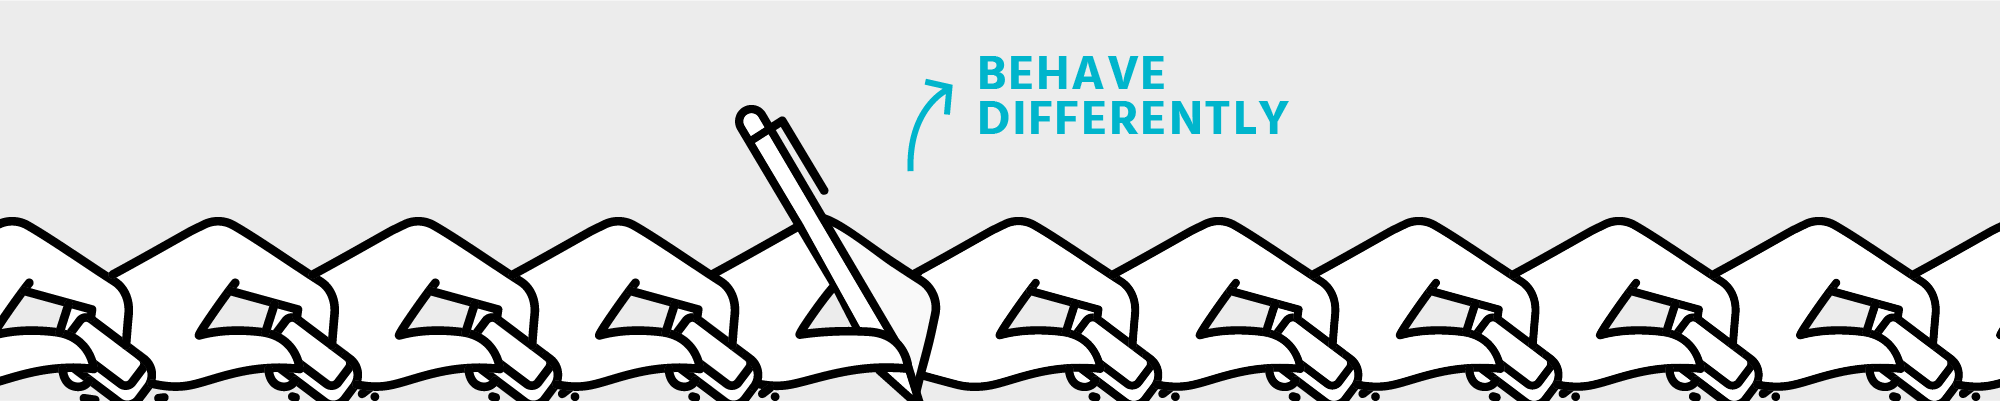 Behave Differently